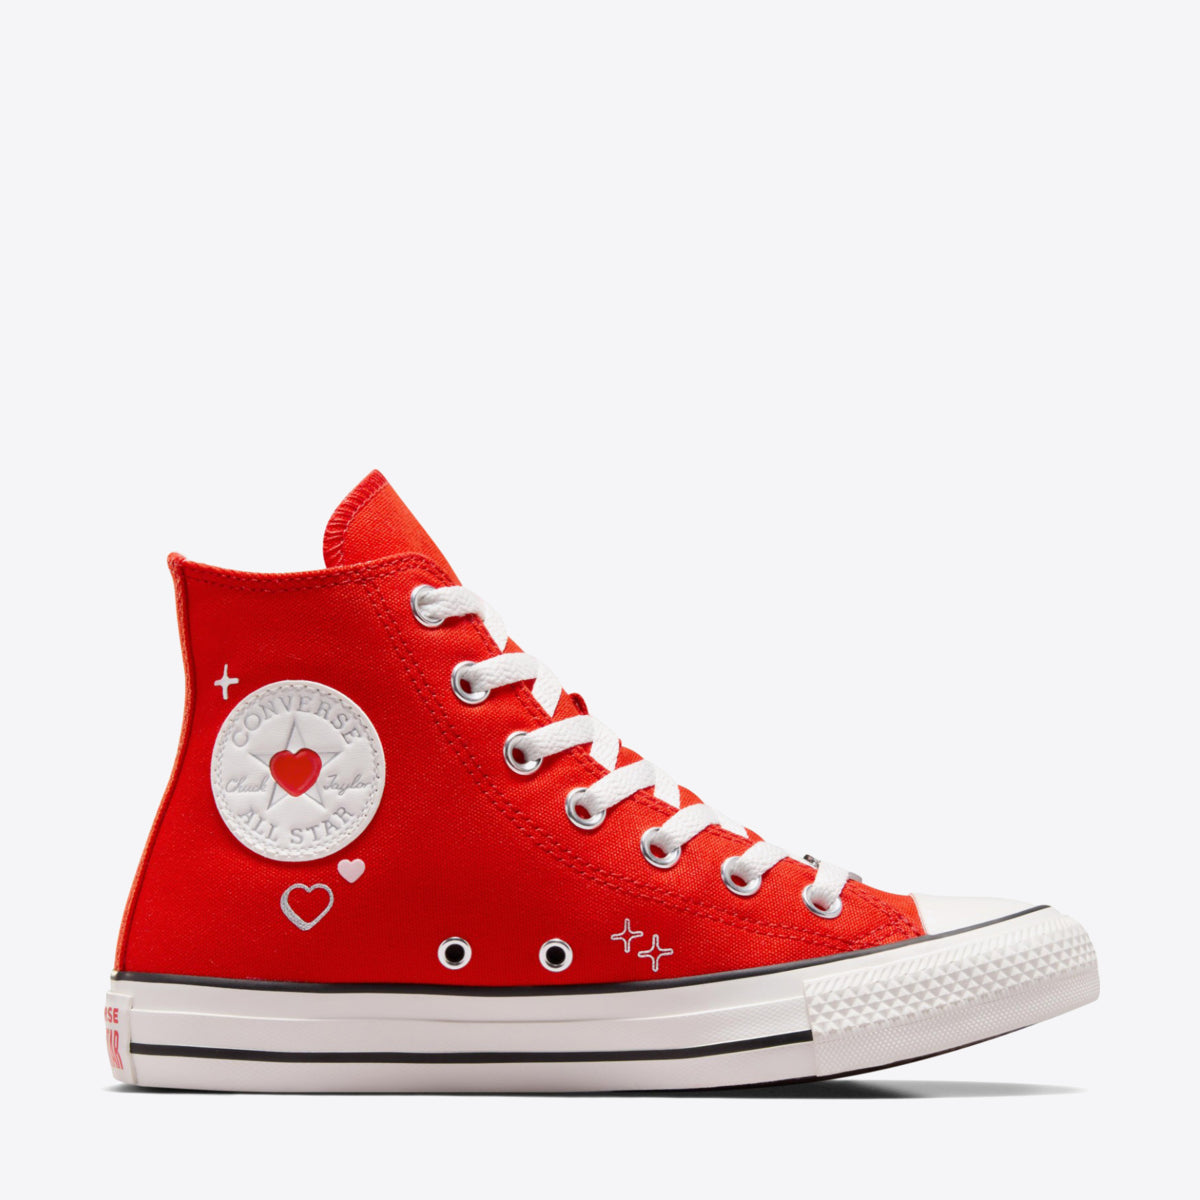 CONVERSE Chuck Taylor All Star BEMY2K High Fever Dream/Vintage White - Image 2